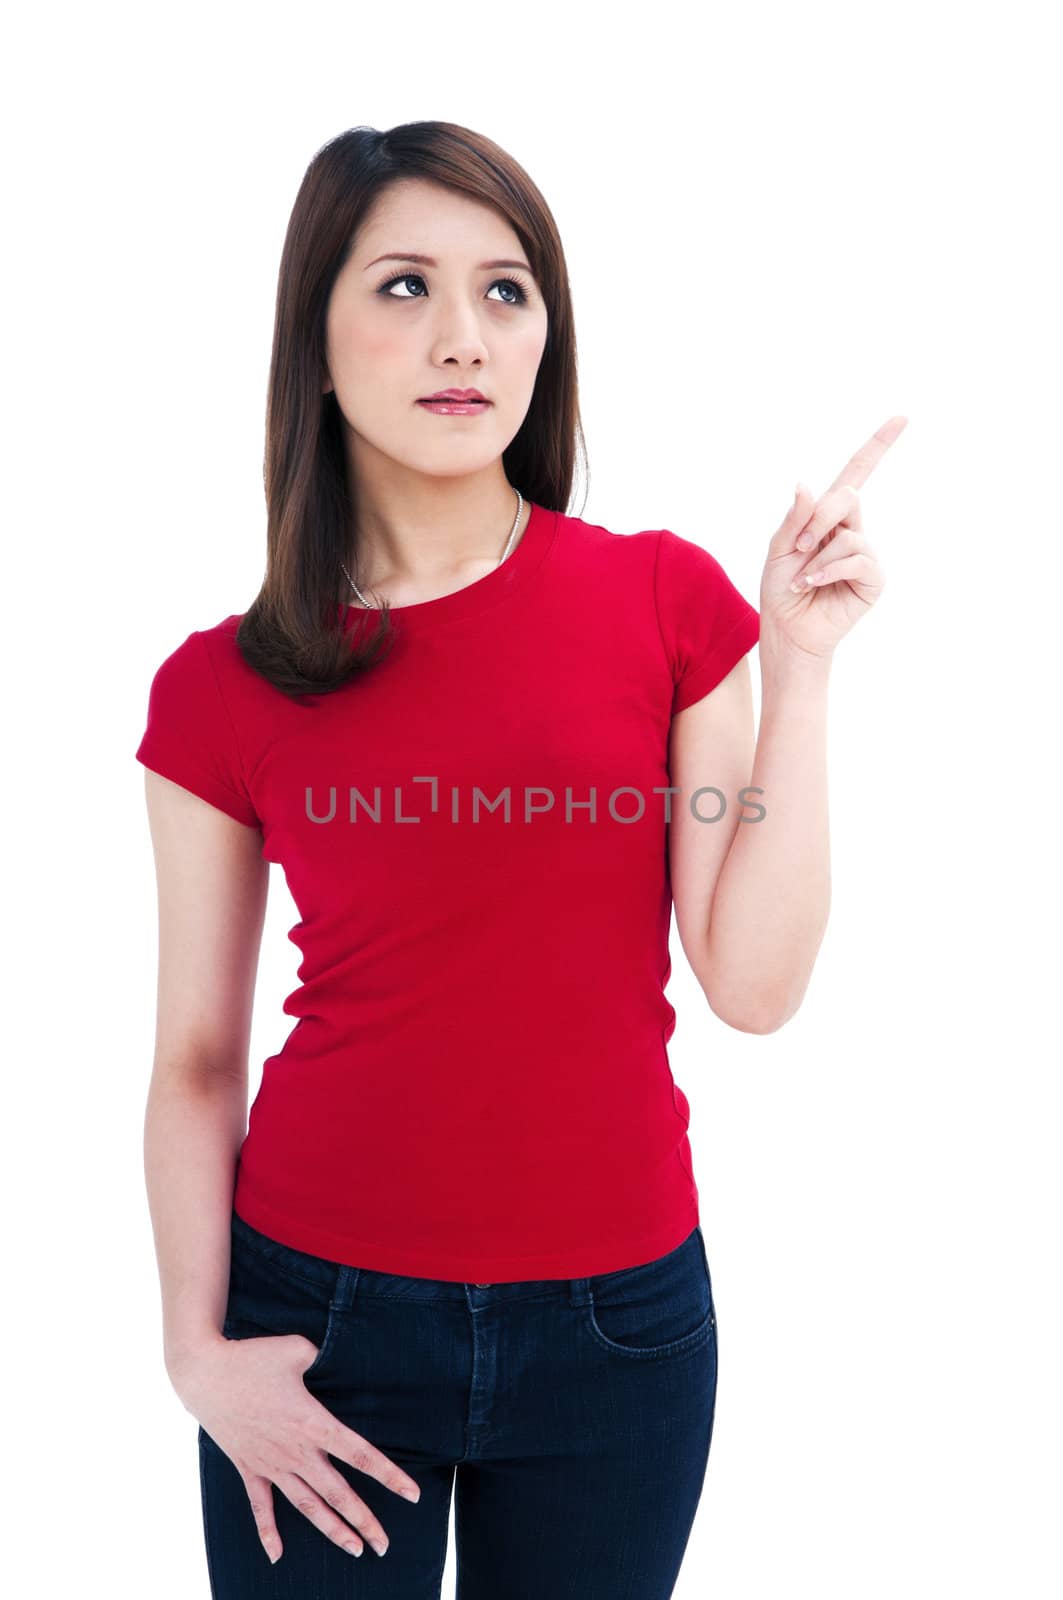 Portrait of an attractive young woman pointing, isolated on white background.